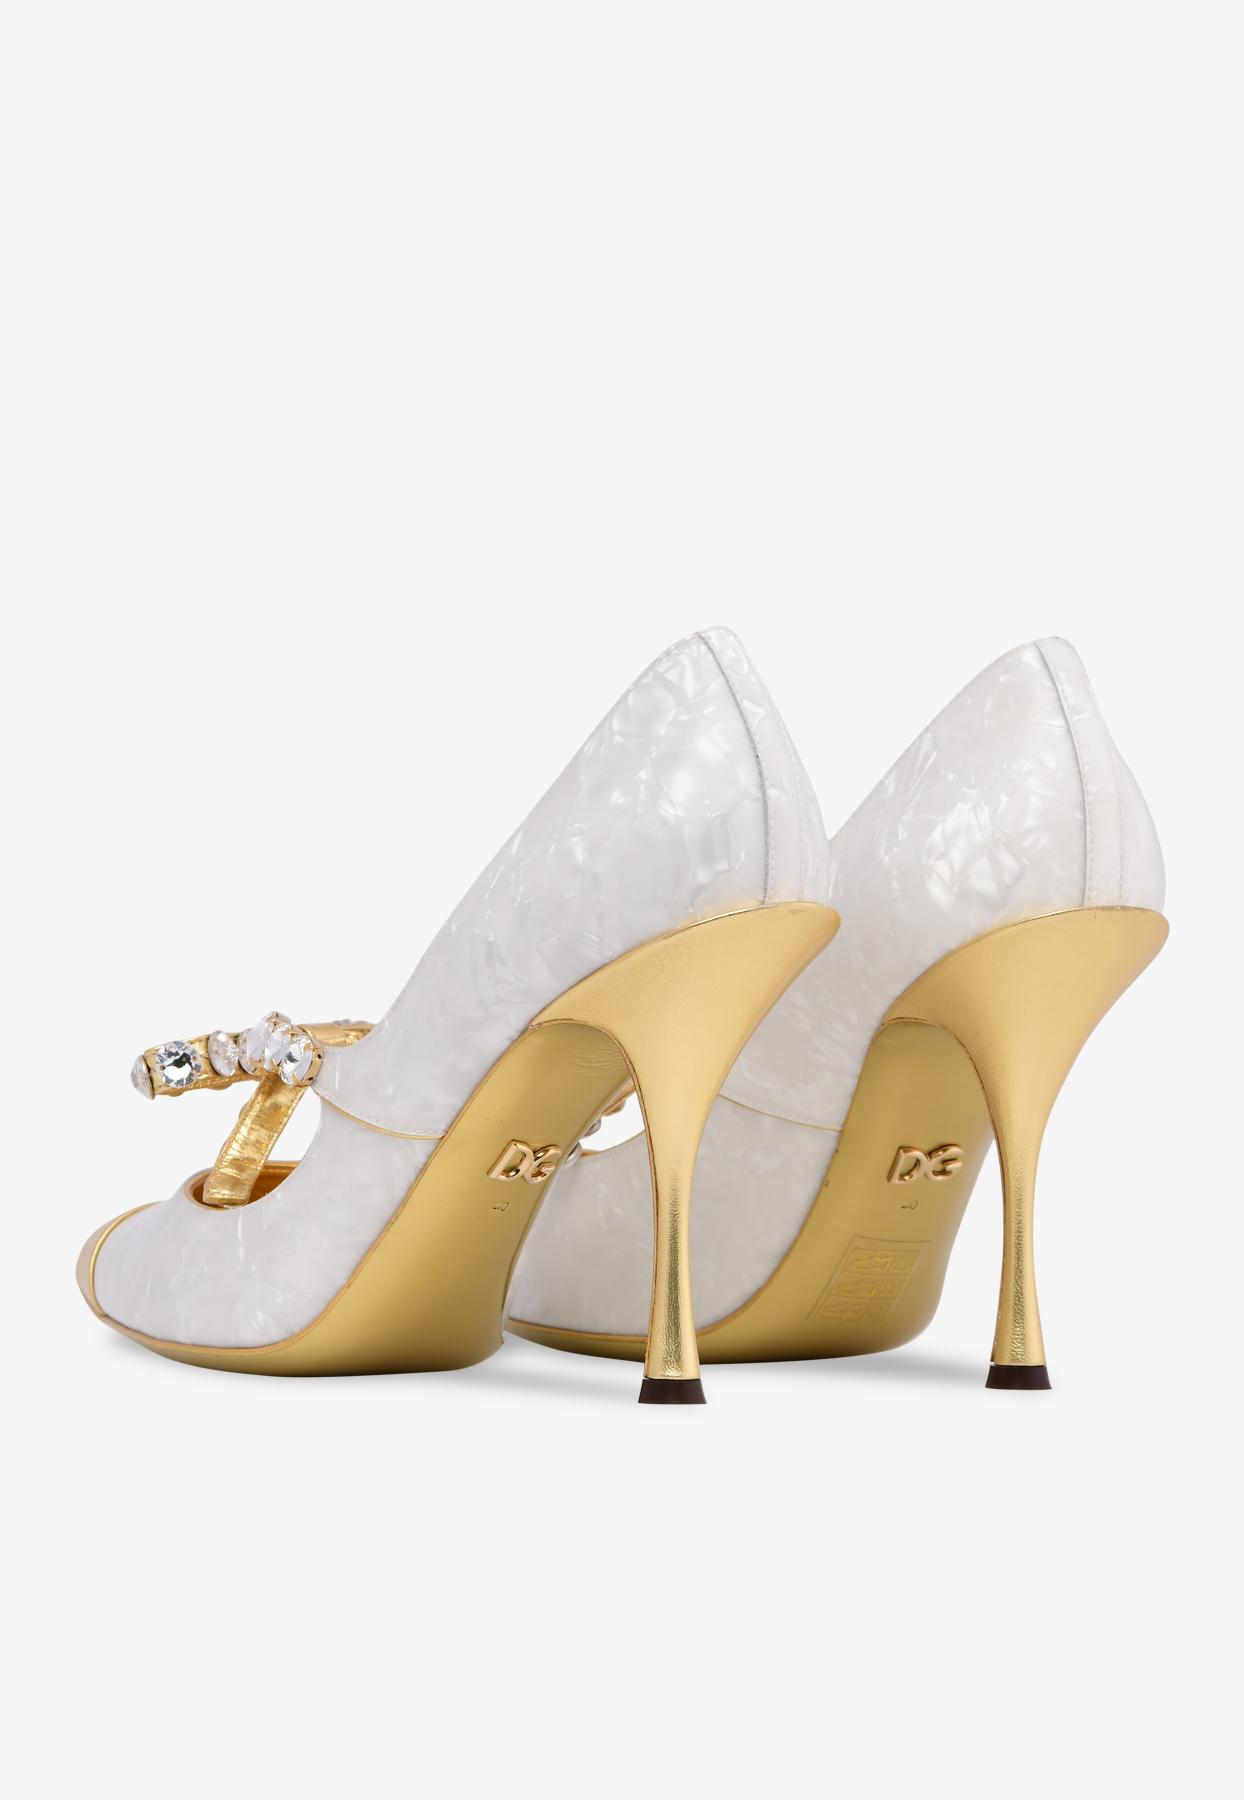 Dolce & Gabbana Lori 90 Mother-of-pearl Leather Pumps With Crystal Bow in  White - Lyst